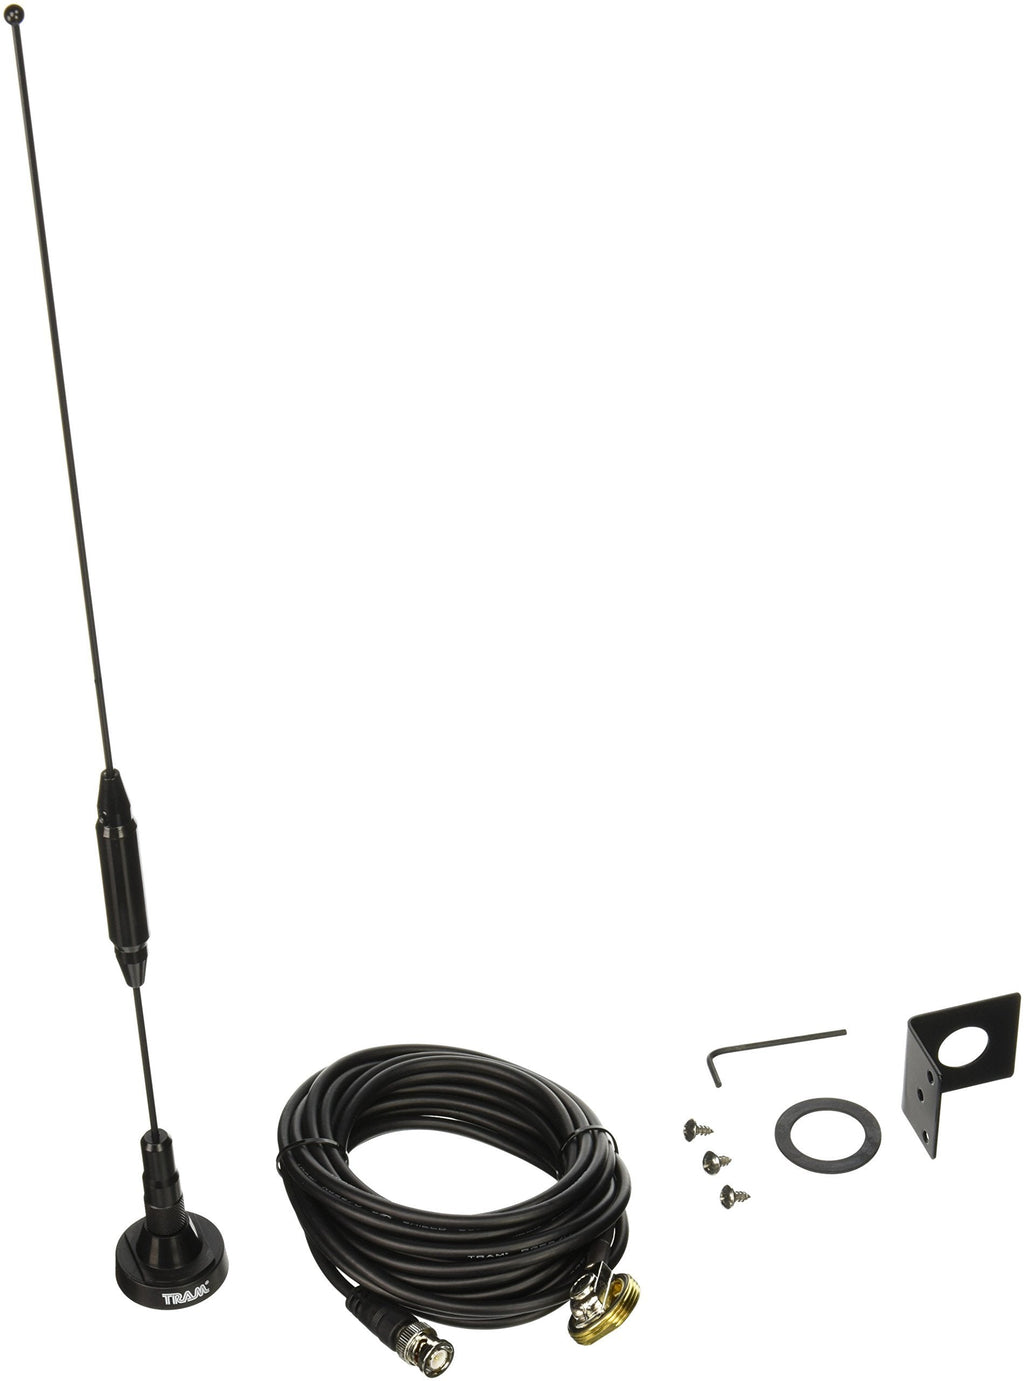 Tram 1091-BNC Scanner Trunk/Hole Mount Antenna Kit with BNC-Male Connector,Gold,Black,19.00in. x 5.25in. x 1.60in